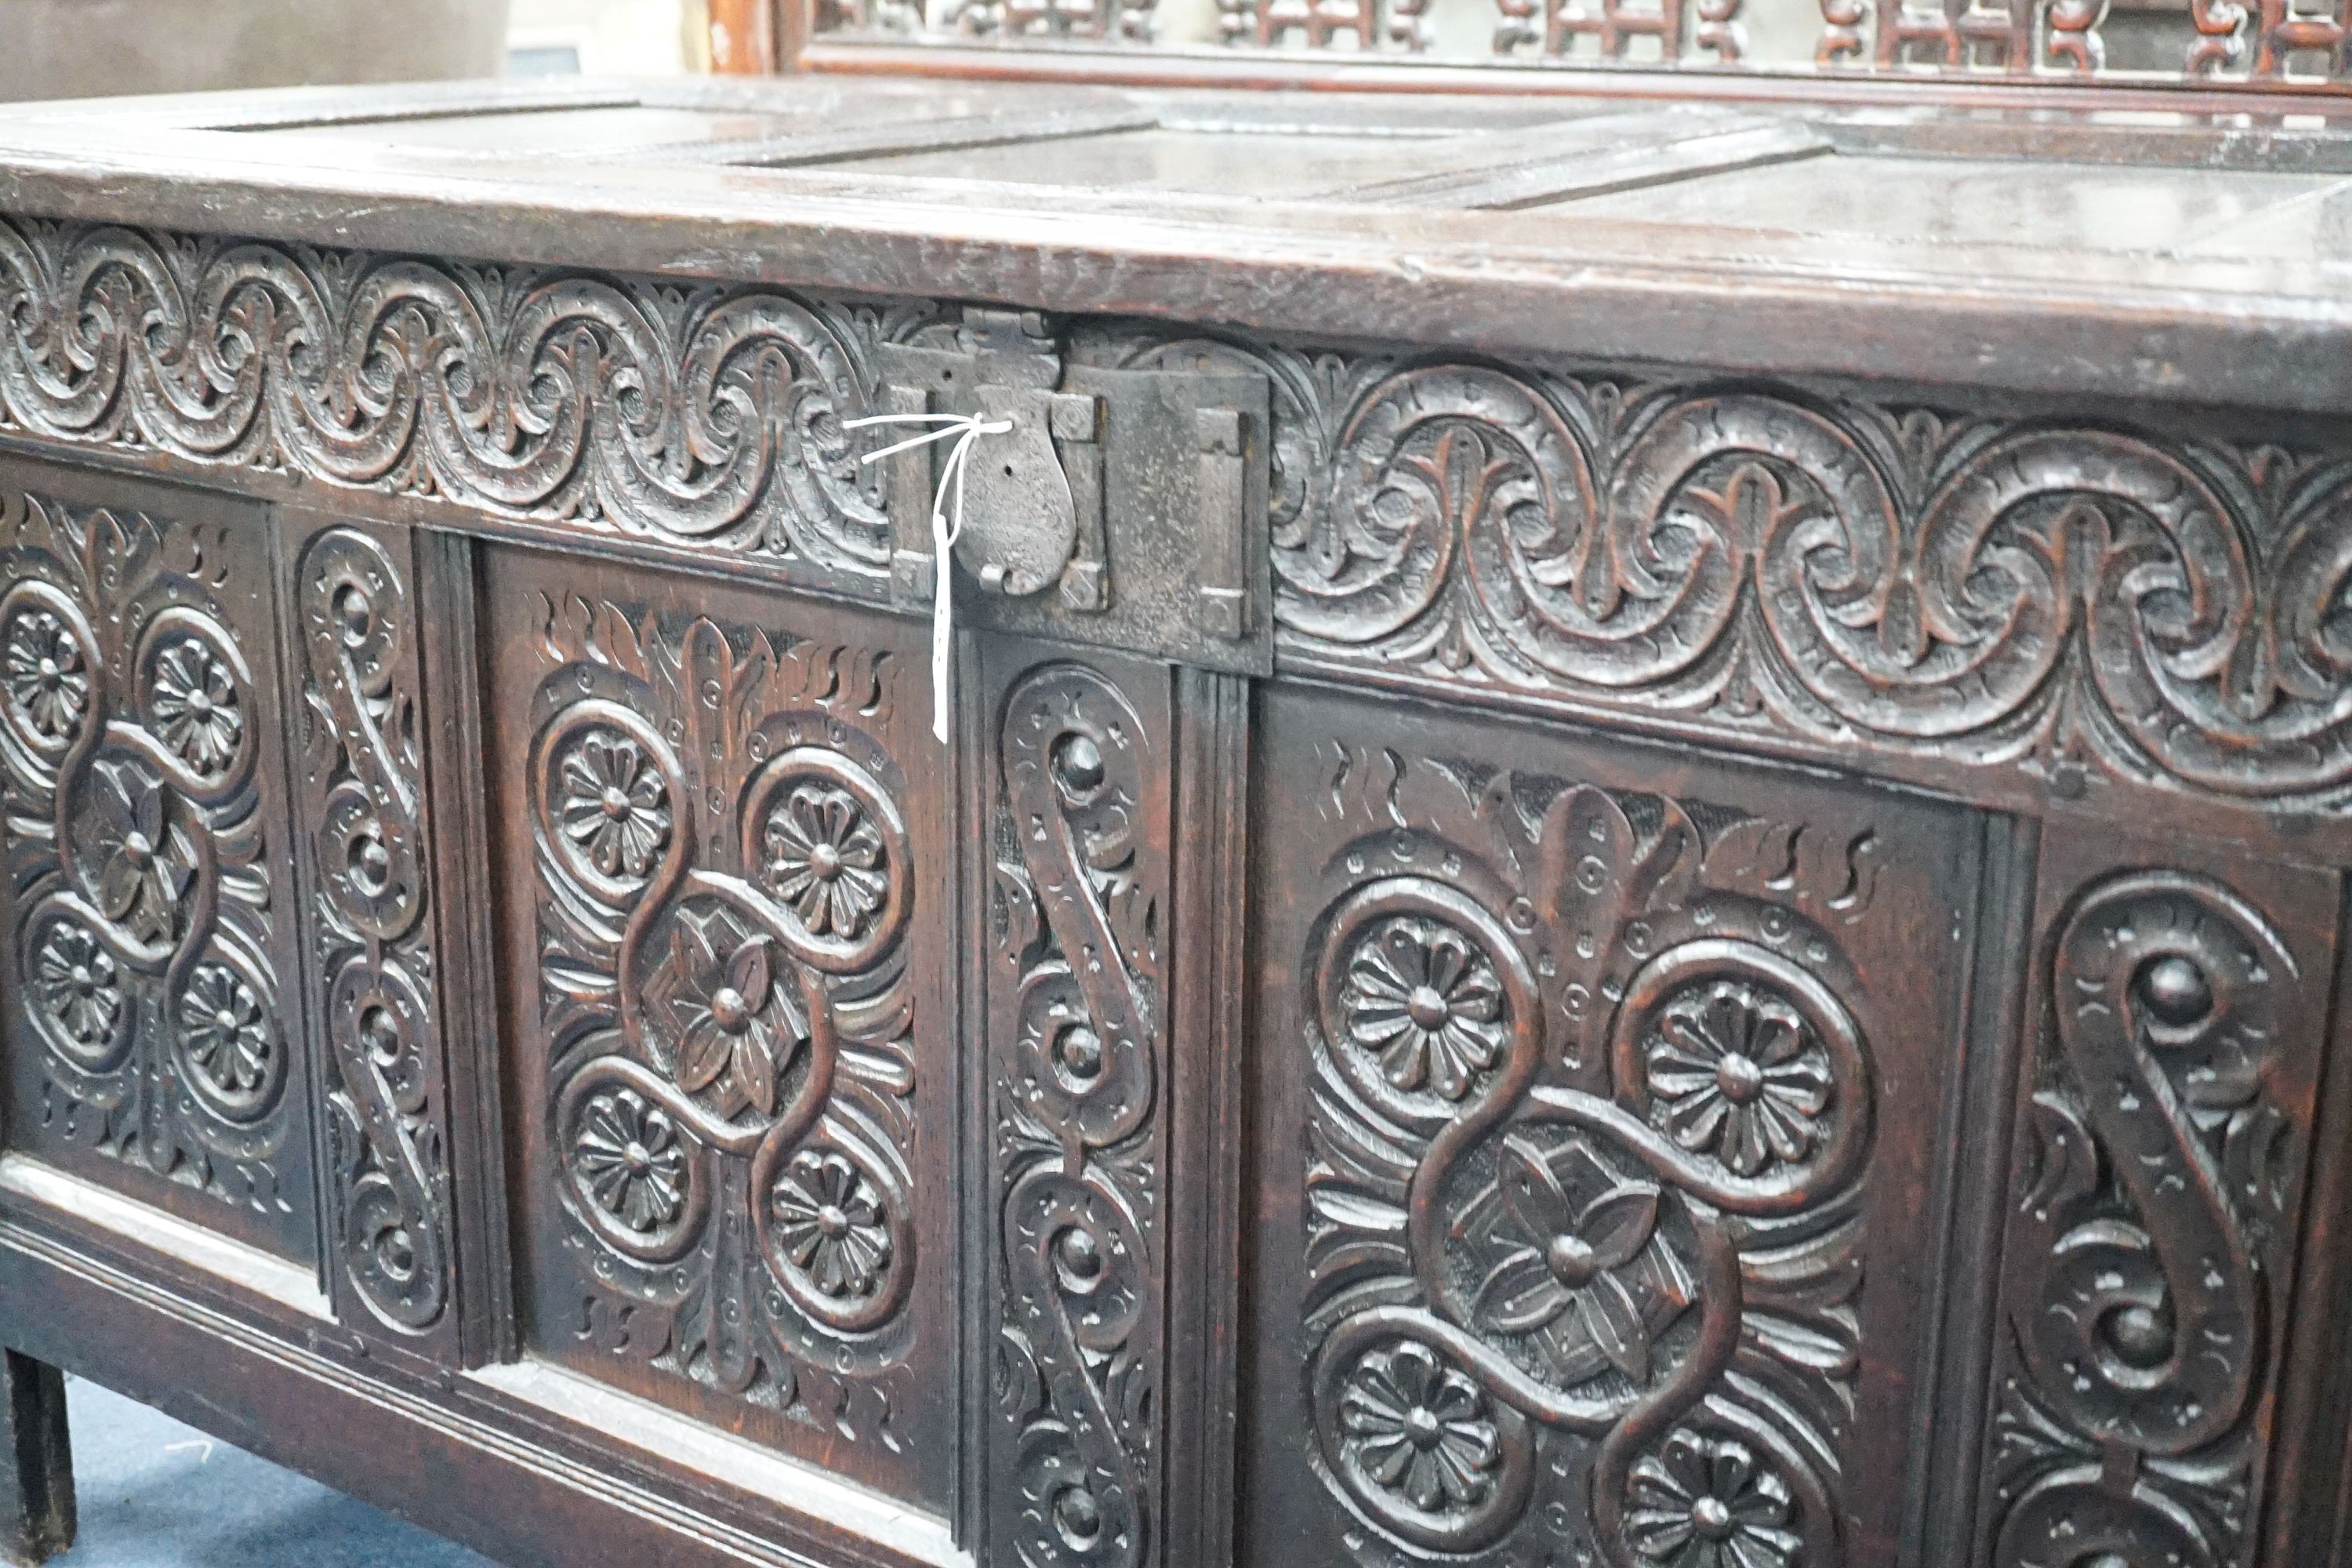 A 17th century Gloucestershire area carved, panelled oak coffer, length 150cm, depth 58cm, height 69cm